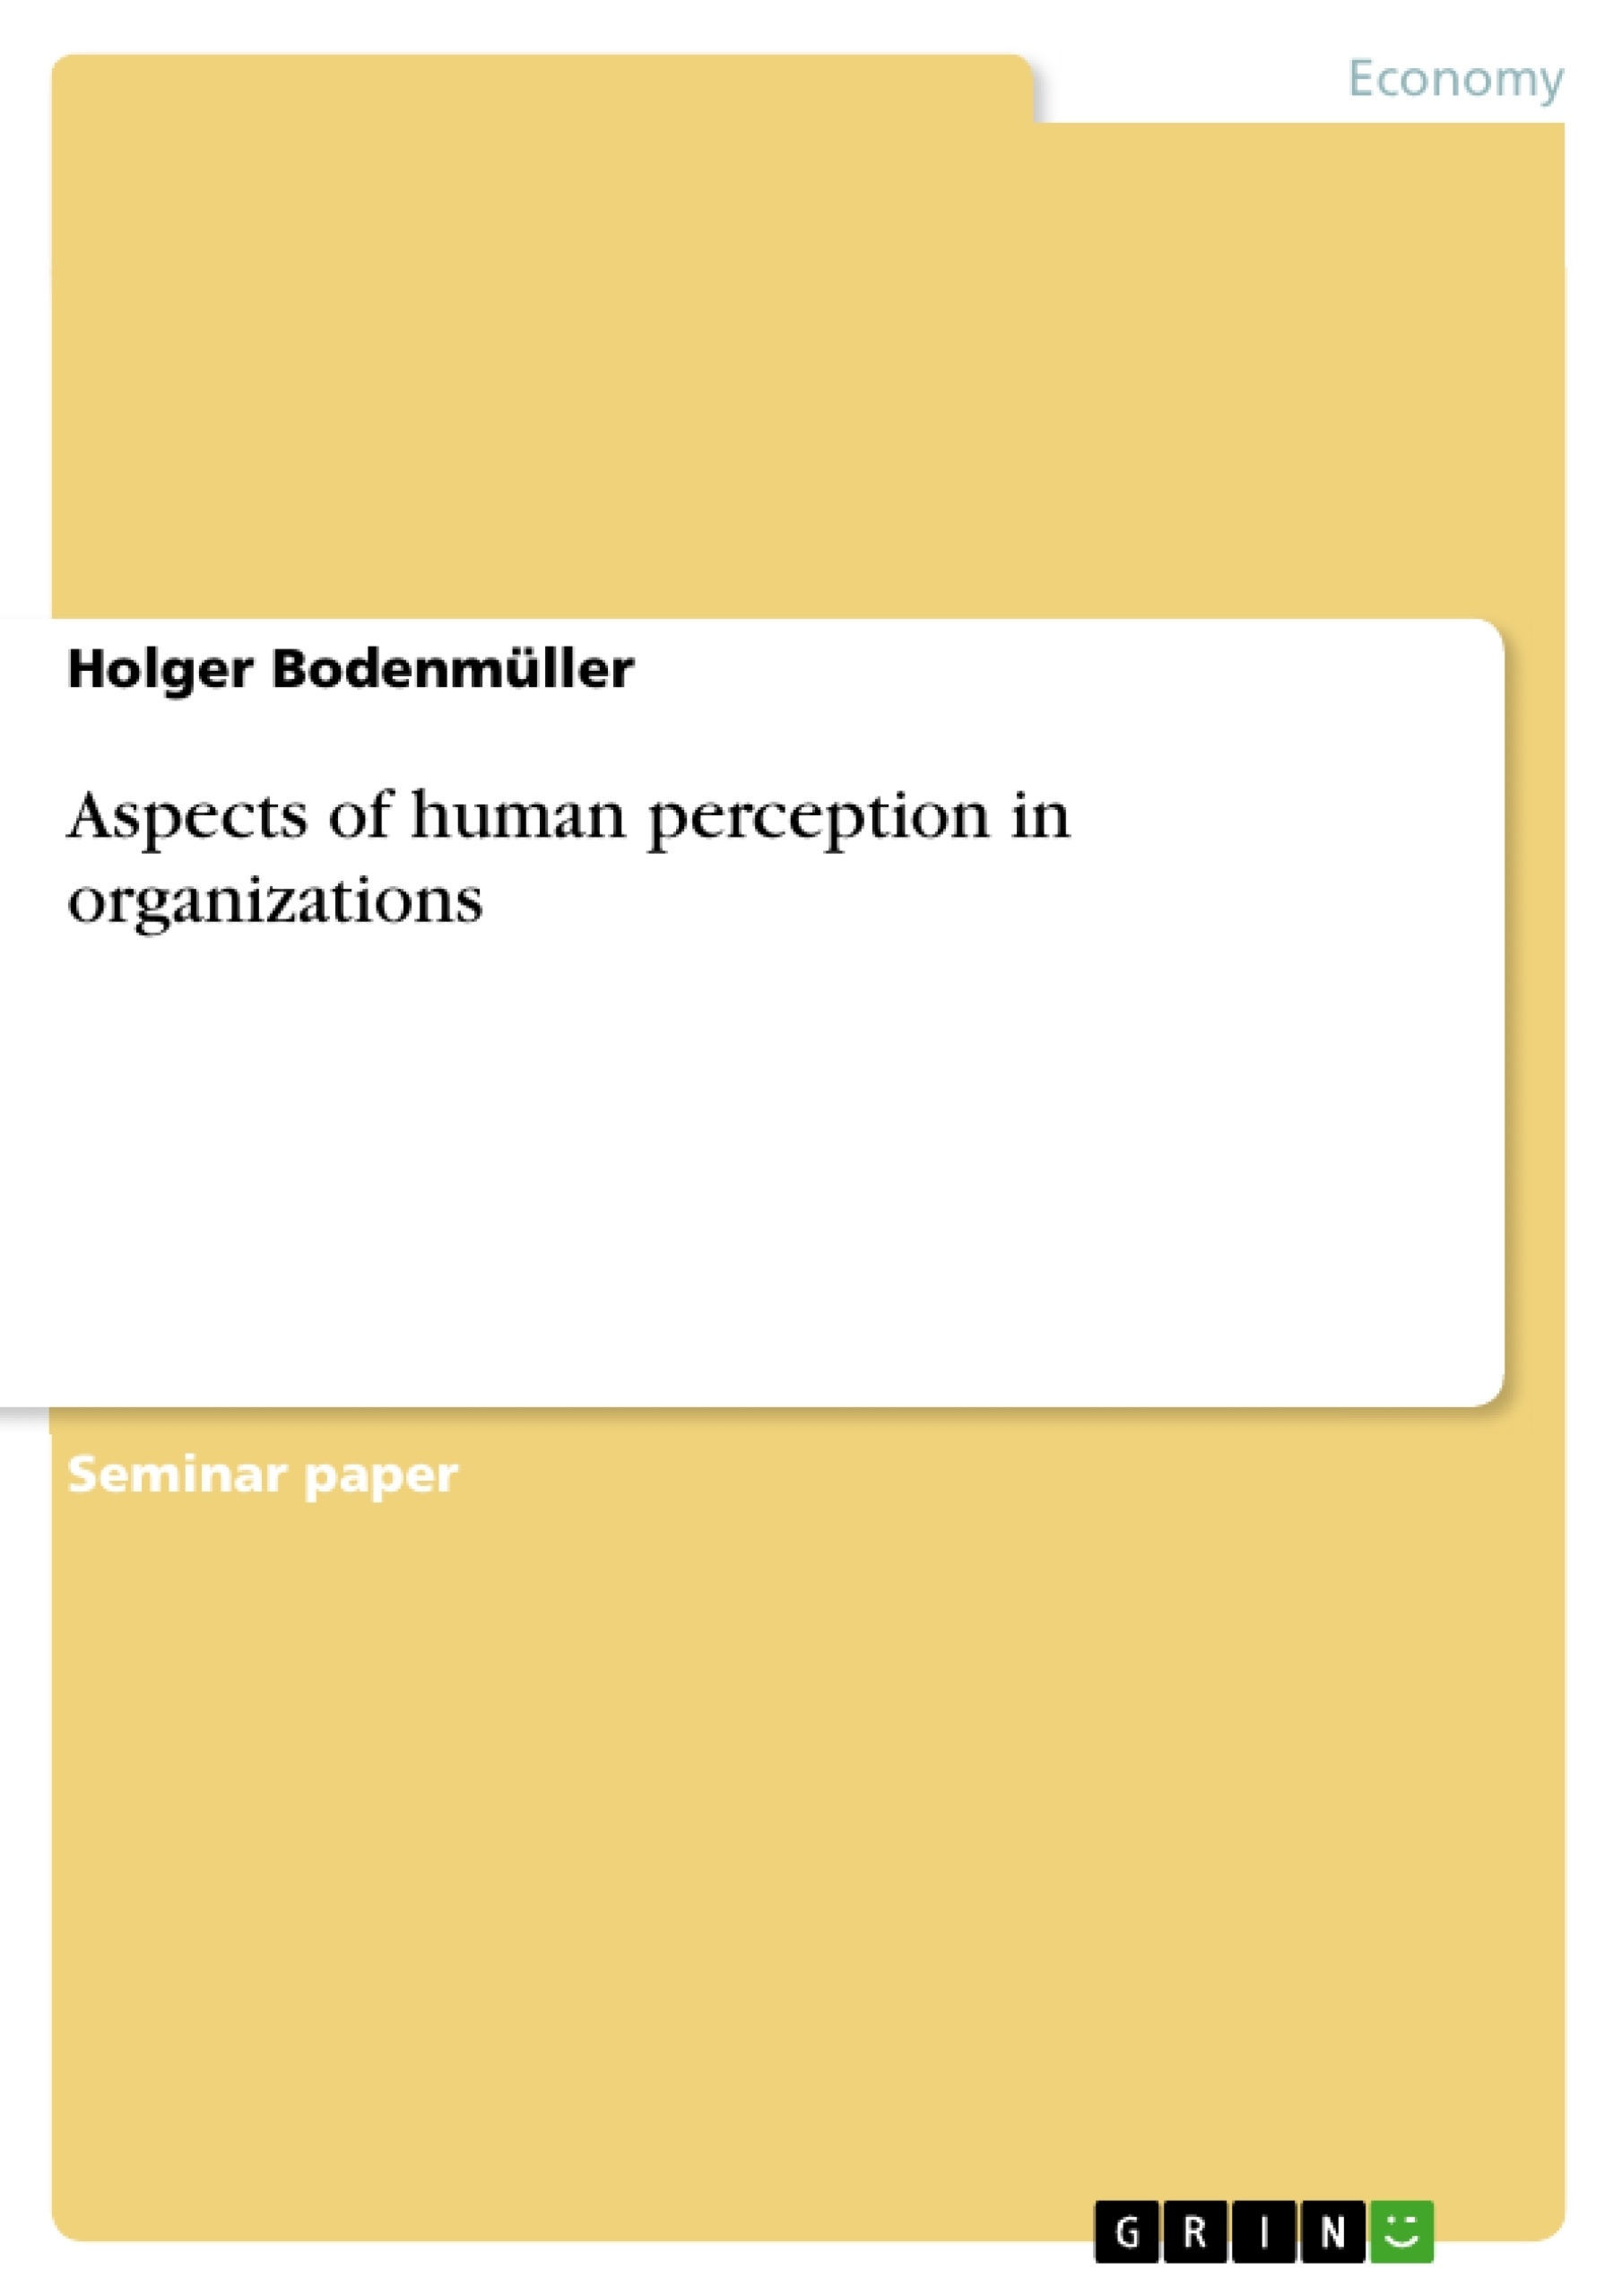 Title: Aspects of human perception in organizations